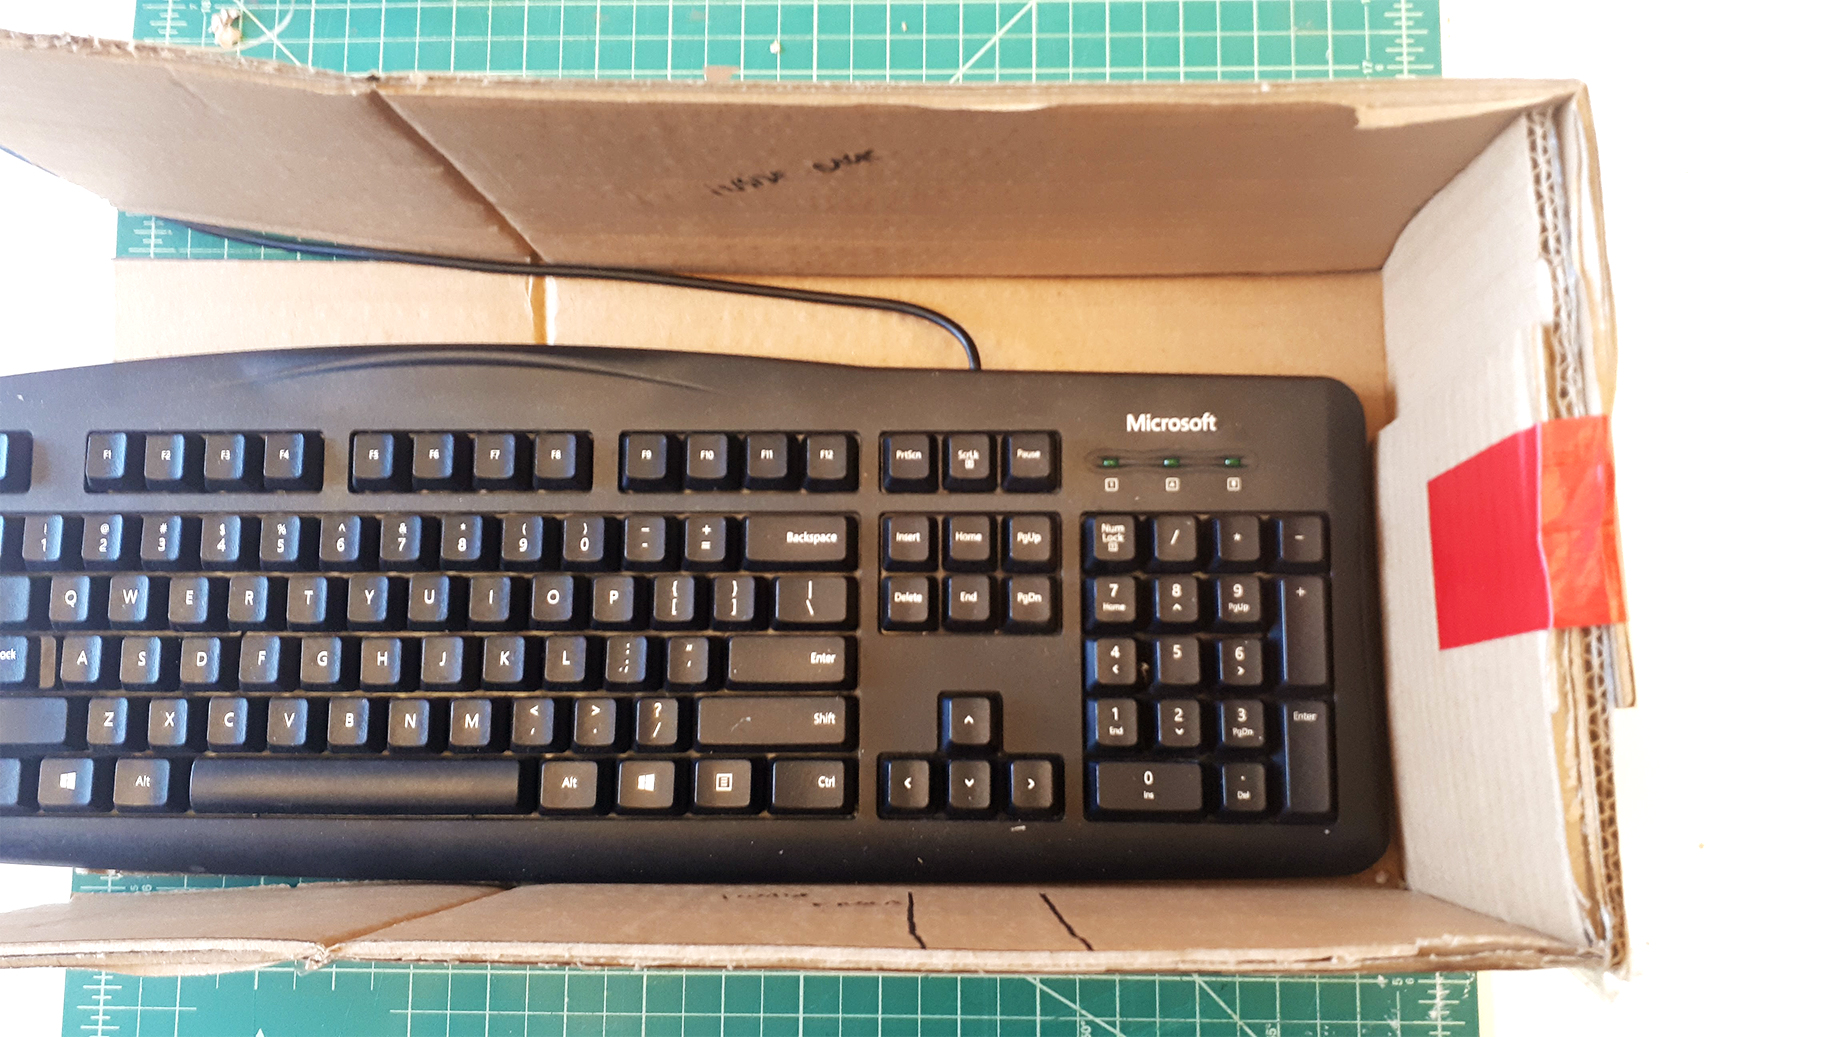 Taped box with keyboard